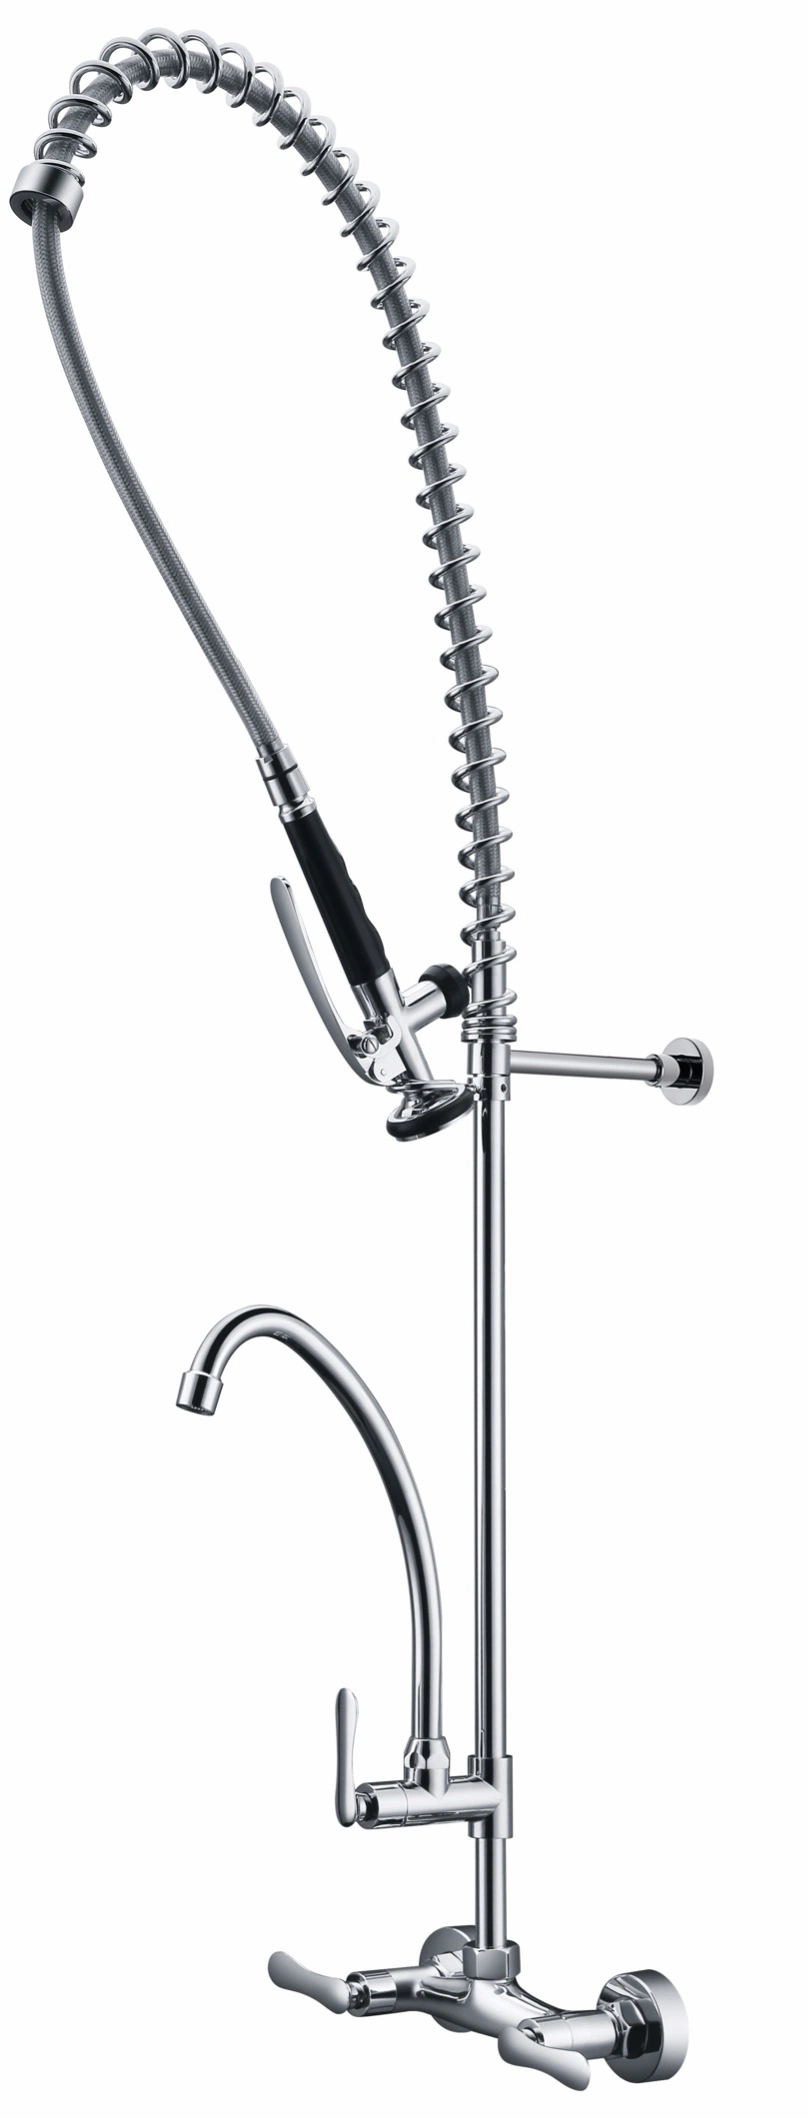 Landonbath Pre Rinse 47 Height Brass Material Hot and Cold High Kitchen Pre-Rinse Faucet with Swivel Spout